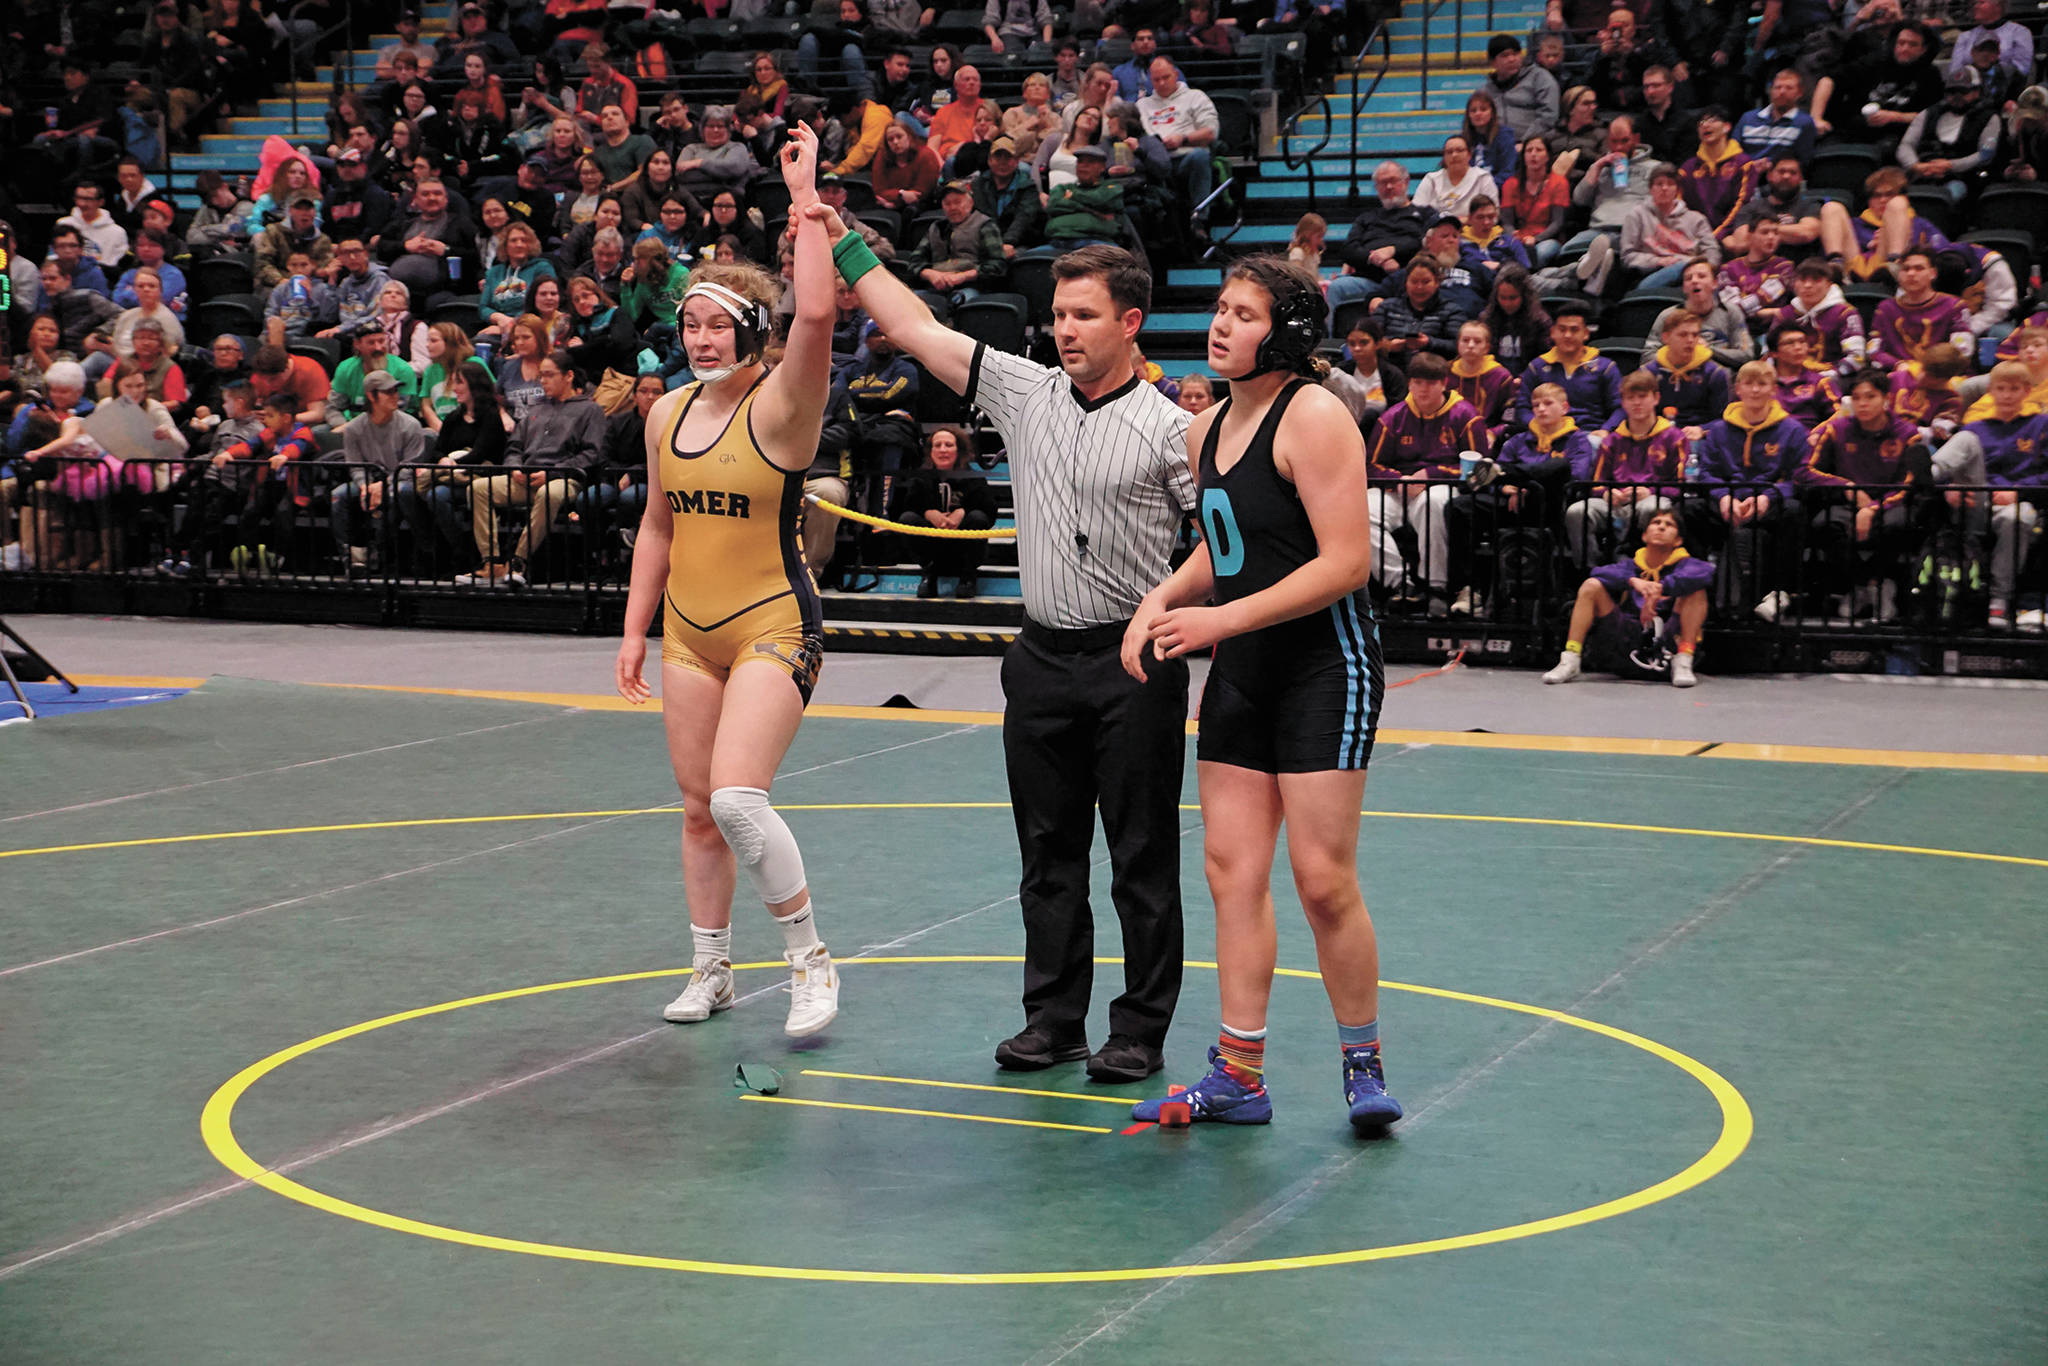 Rayana Vigil, left, celebrates a victorious bout during the 2019 ASAA/First National Bank Alaska Wrestling State Championships in Anchorage, Alaska. Vigil was crowned the women’s state champion for the 189-pound weight class. (Photo courtesy Alaska School Activities Association)